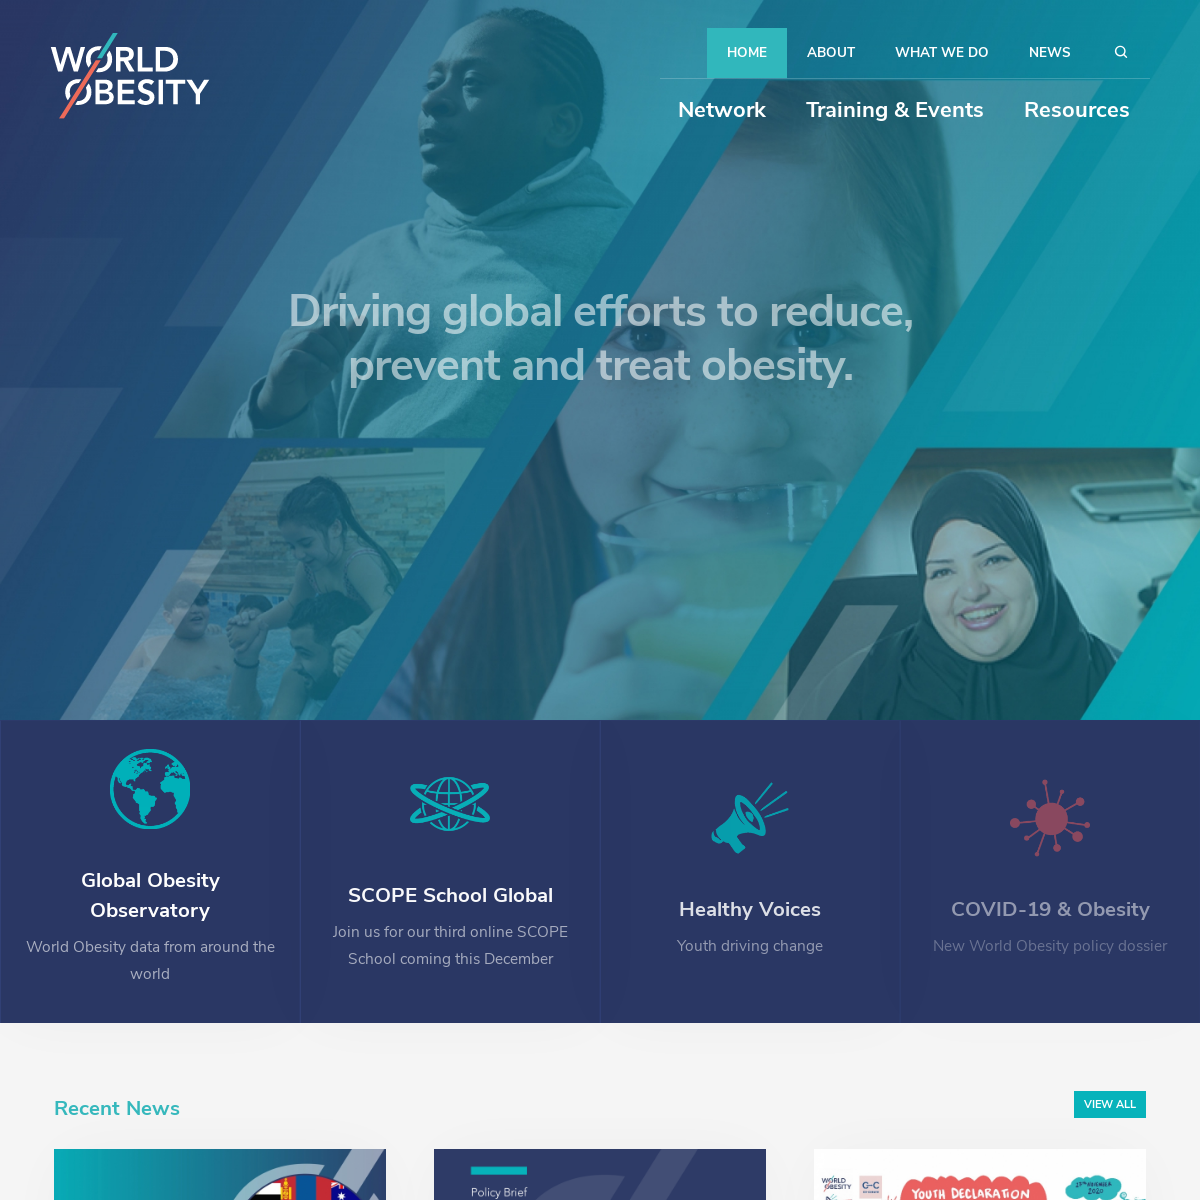 A complete backup of worldobesity.org